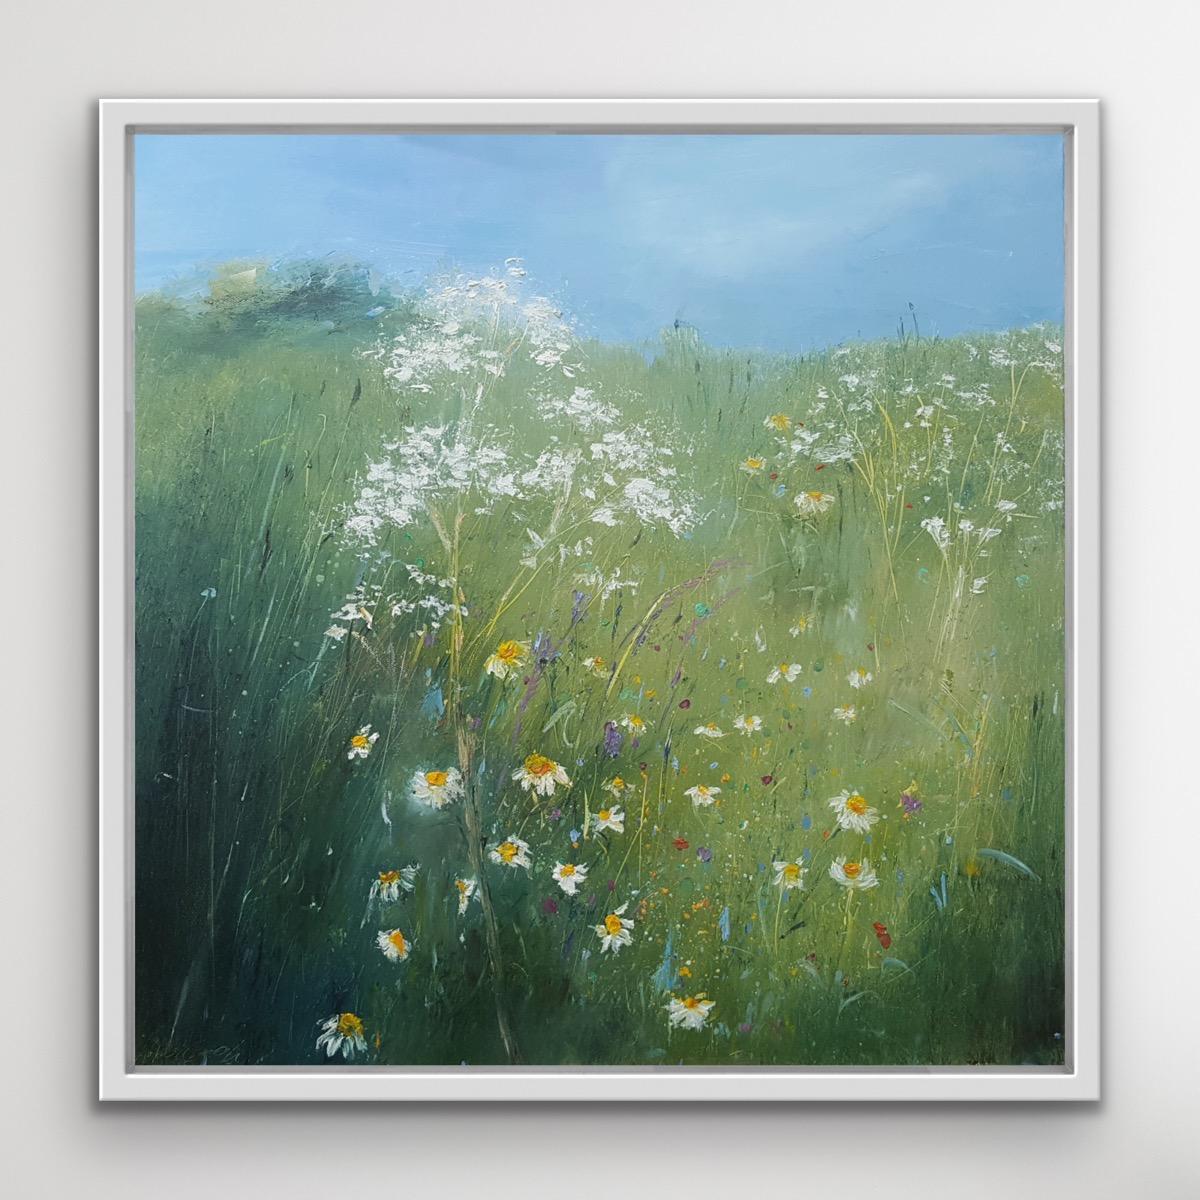 Inspired from walking around the fields near where I live.
Libbi Gooch, painter, is available for sale online and in our art gallery at Wychwood Art. Libbi Gooch is self-taught, so her work is a very personal and instinctive response to the power of